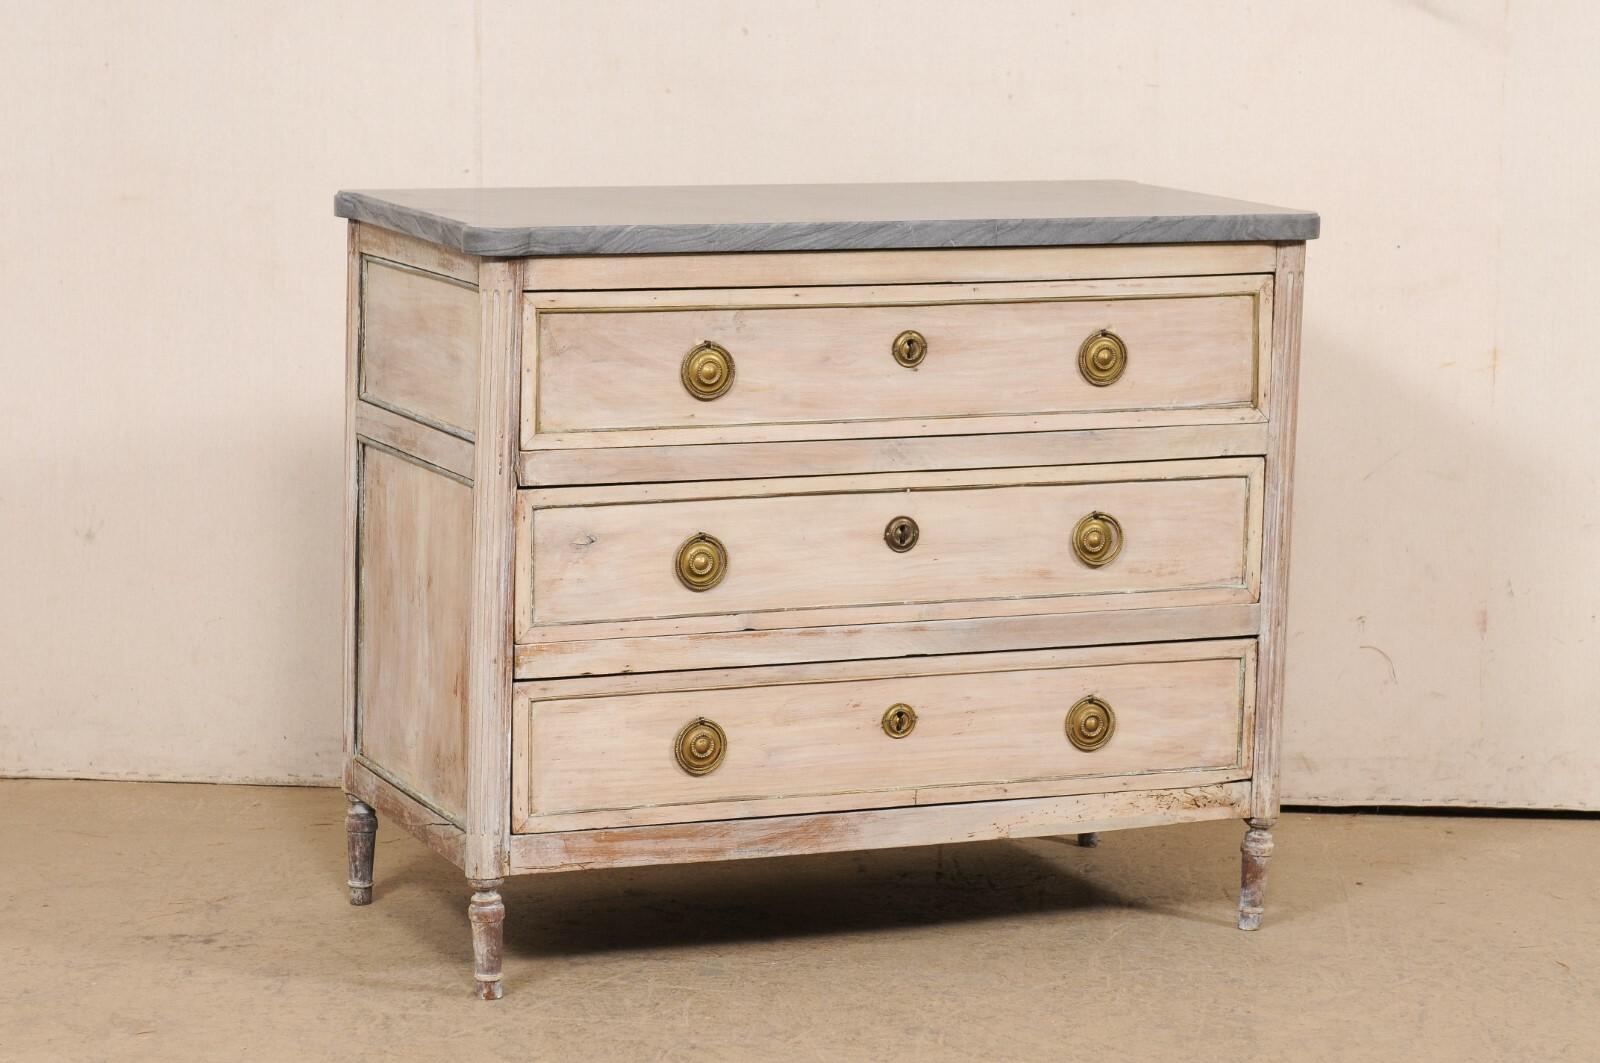 A French Neoclassical period carved wood commode, with stunning new custom marble top, from the early 19th century. This antique chest from France features rectangular-shaped marble top, with pronounced and outwardly rounded corners, which rests